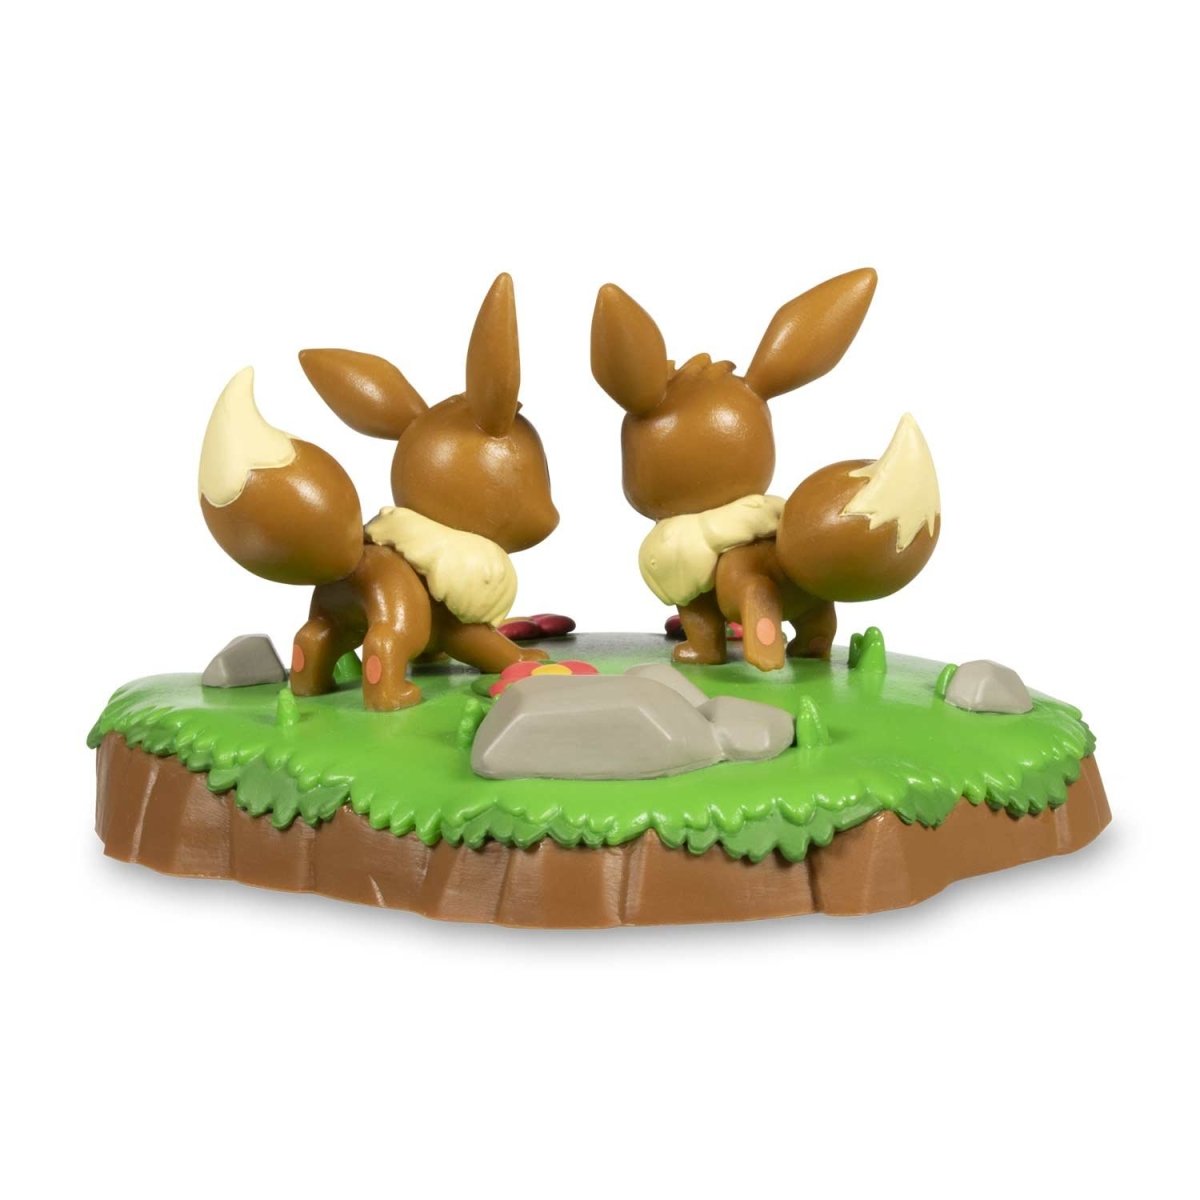 Pokémon An Afternoon With Eevee &amp; Friends: Eevee Figure By Funko-Pokemon Centre-Ace Cards &amp; Collectibles